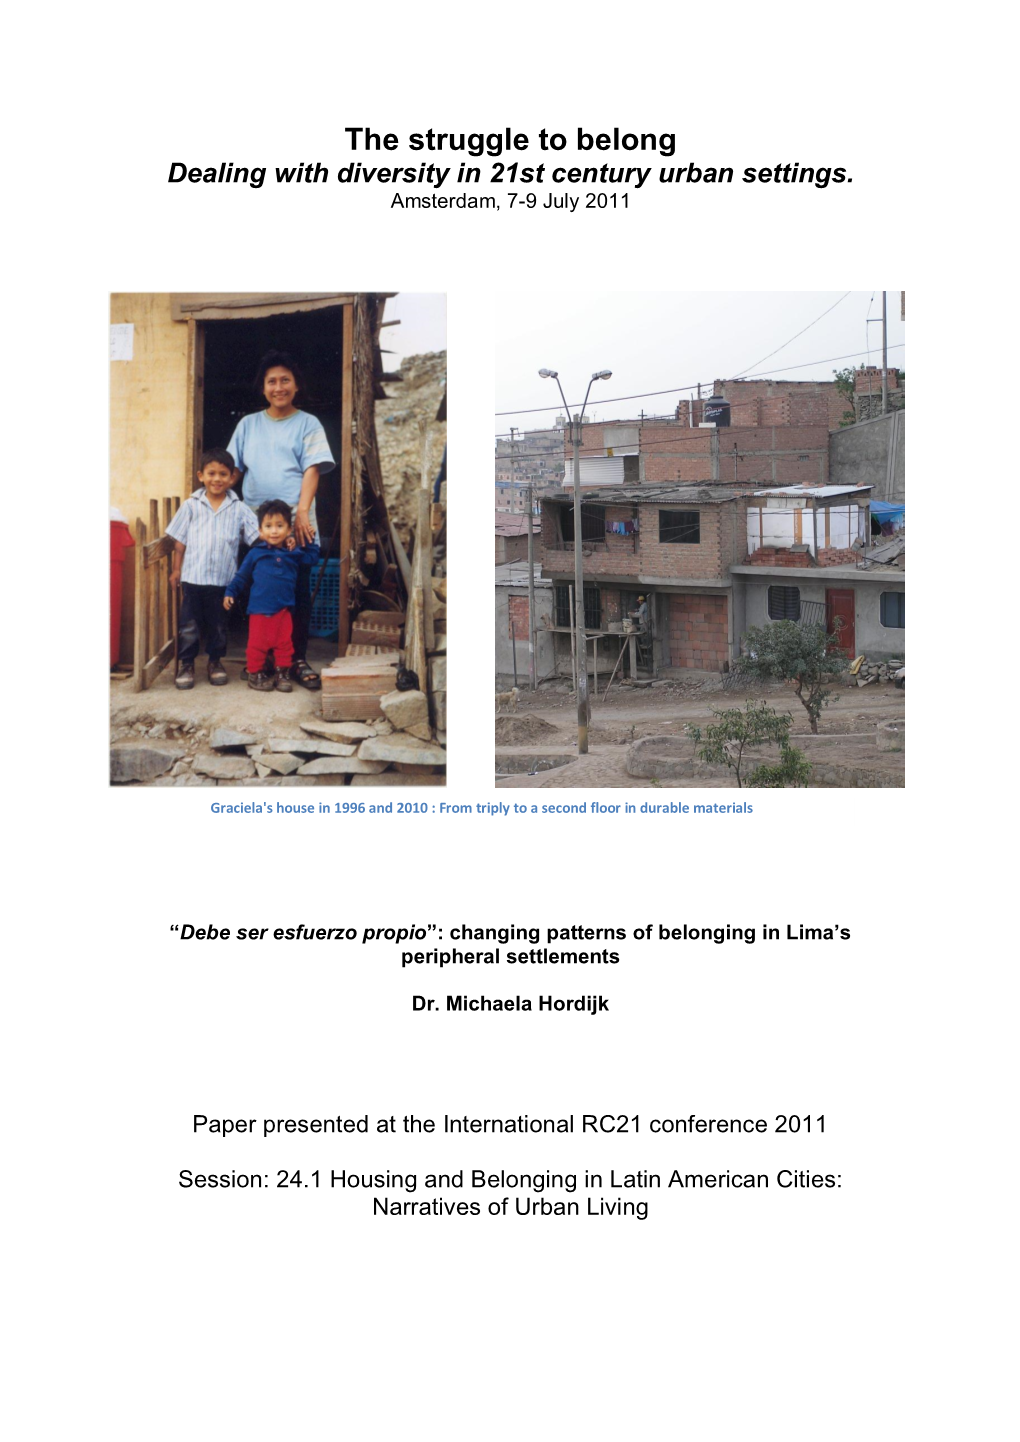 Changing Patterns of Belonging in Lima's Peripheral Settlements